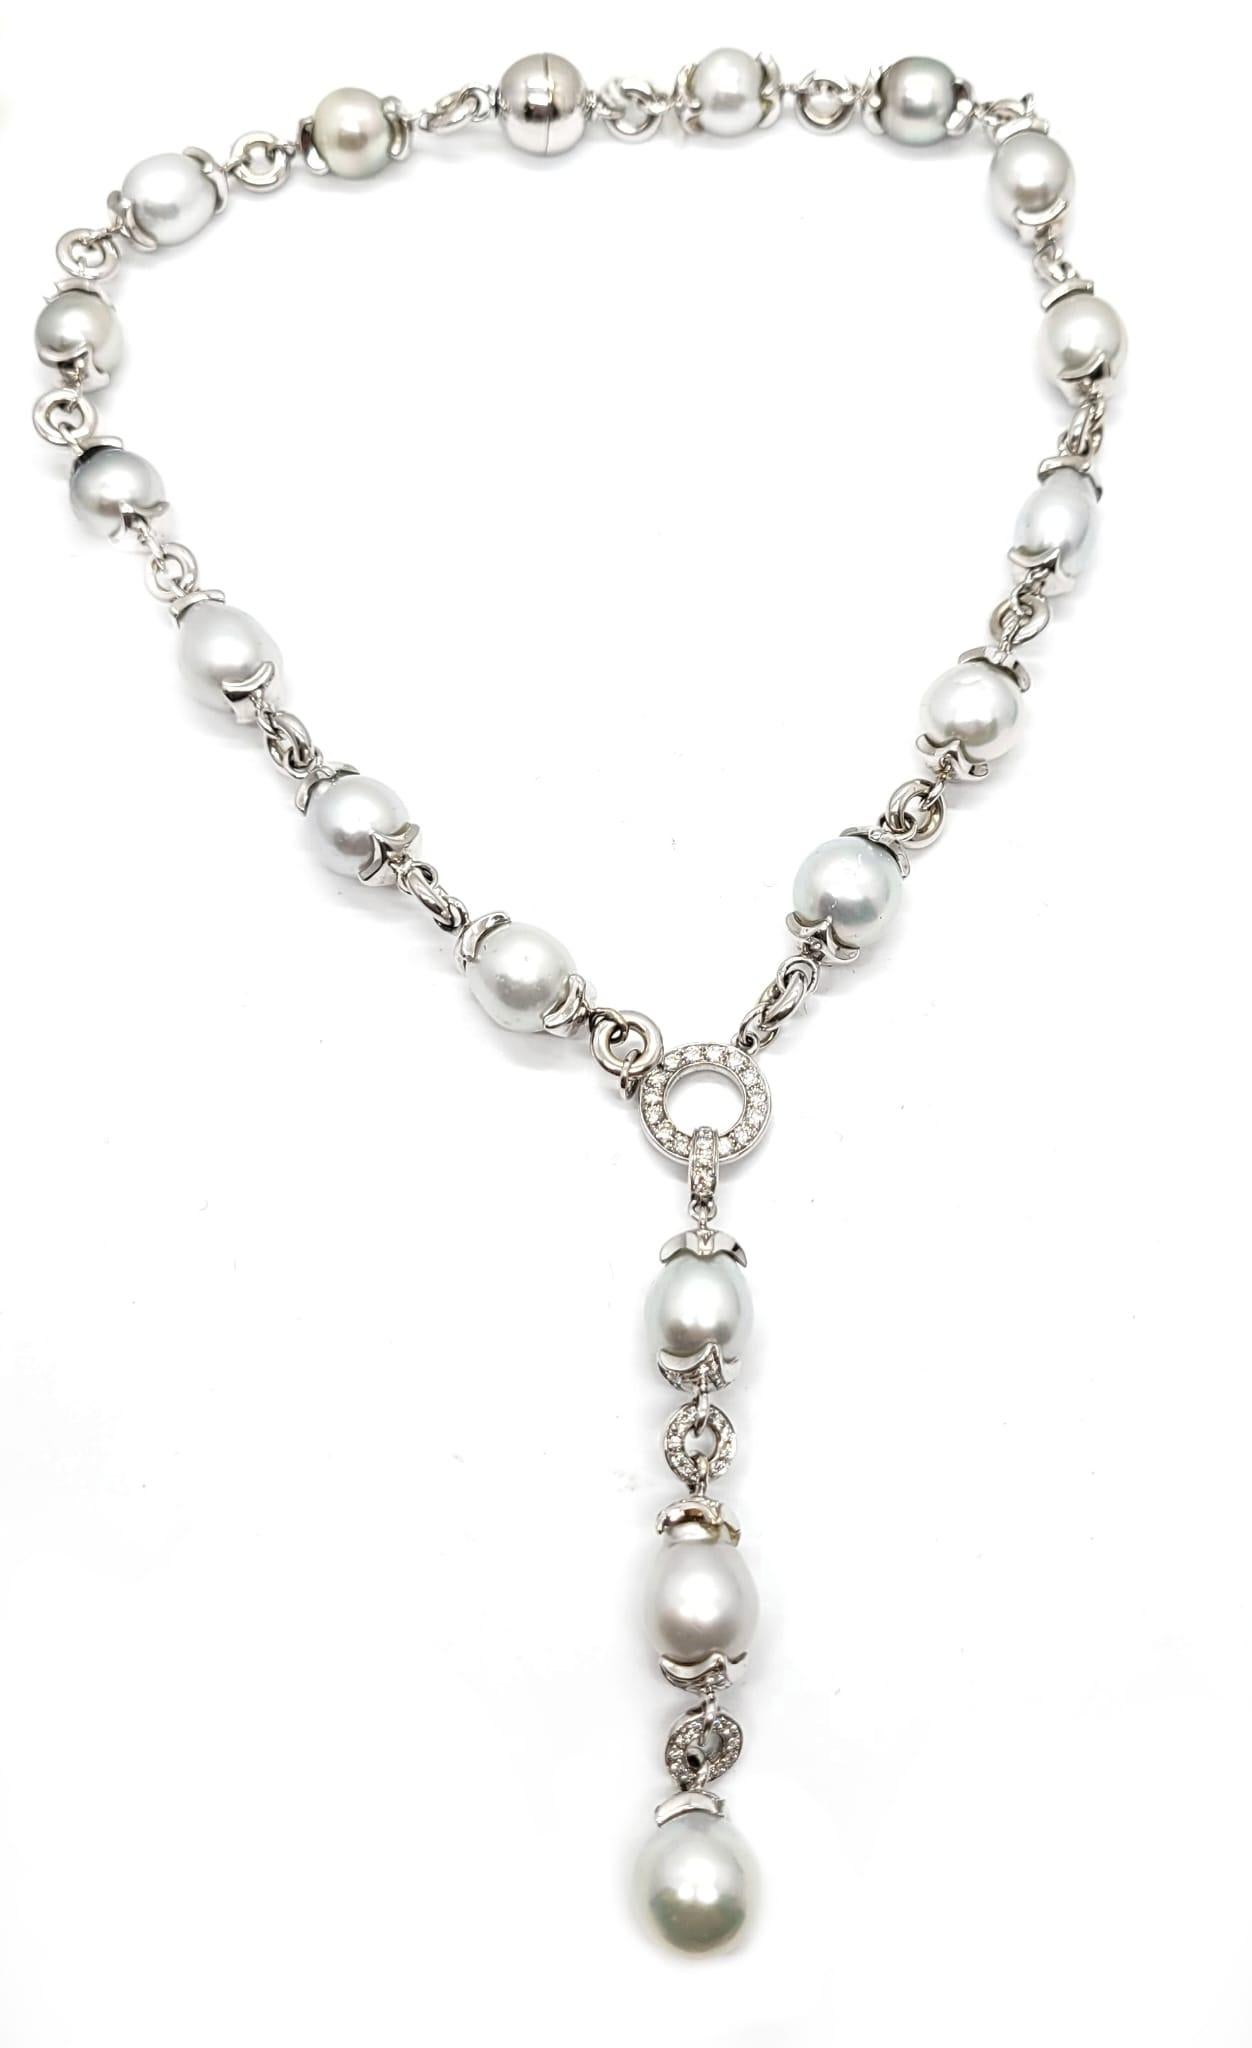 Andreoli Diamond South Sea Pearl 18 Karat White Gold Necklace

This necklace features:
- 0.91 Carat Diamond
- South Sea Pearl
- 58.70 Gram 18K White Gold
- Made In Italy